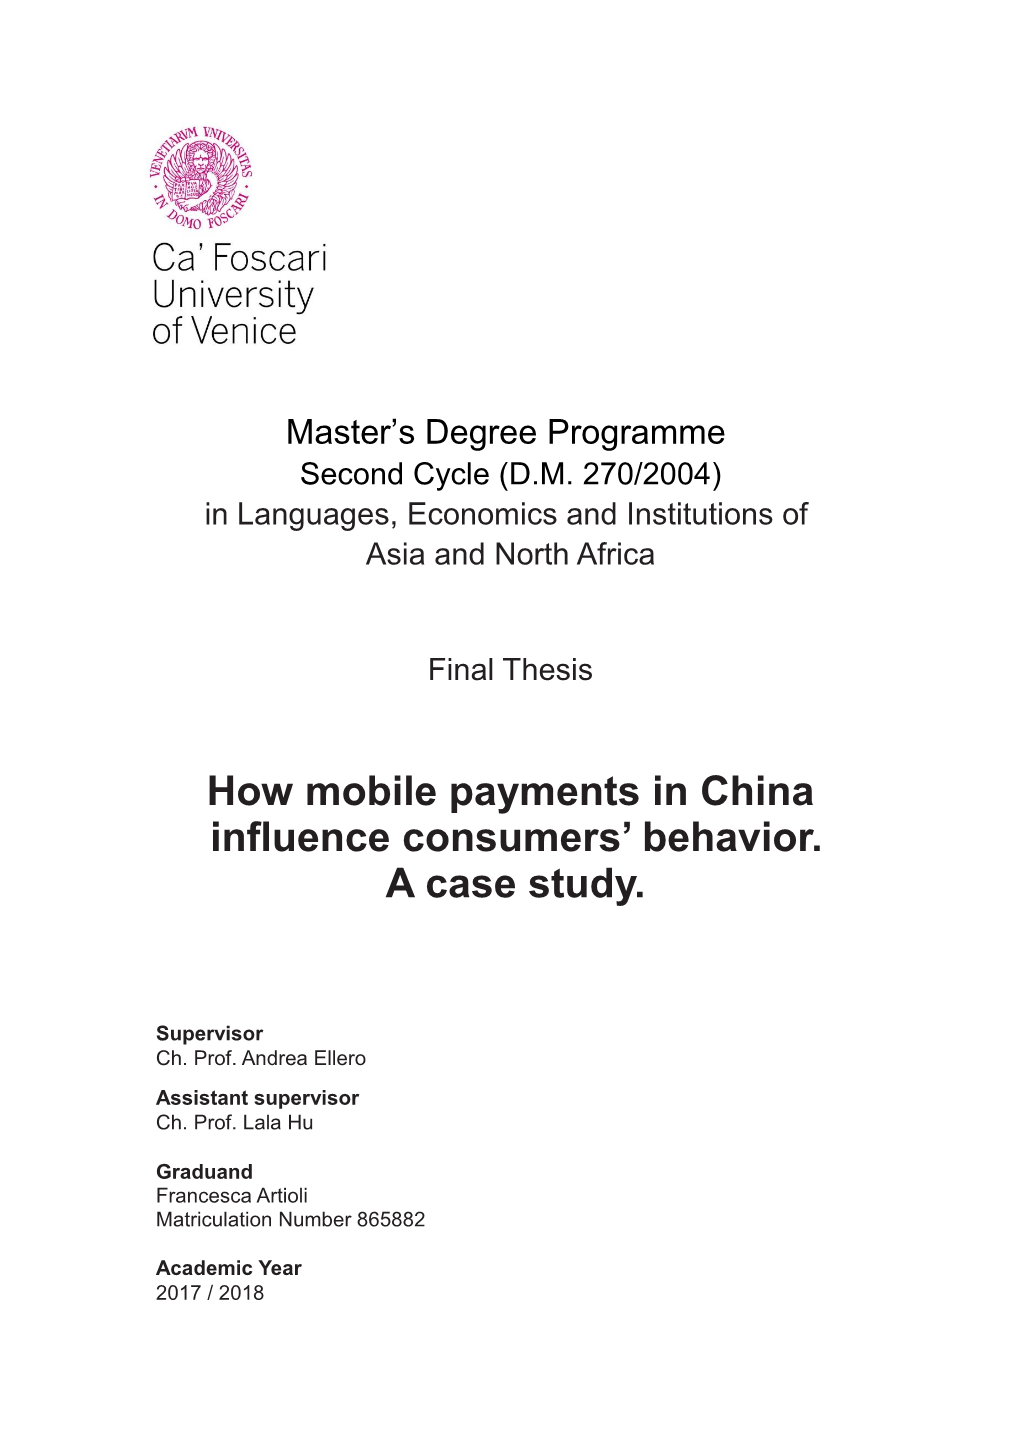 How Mobile Payments in China Influence Consumers' Behavior. A